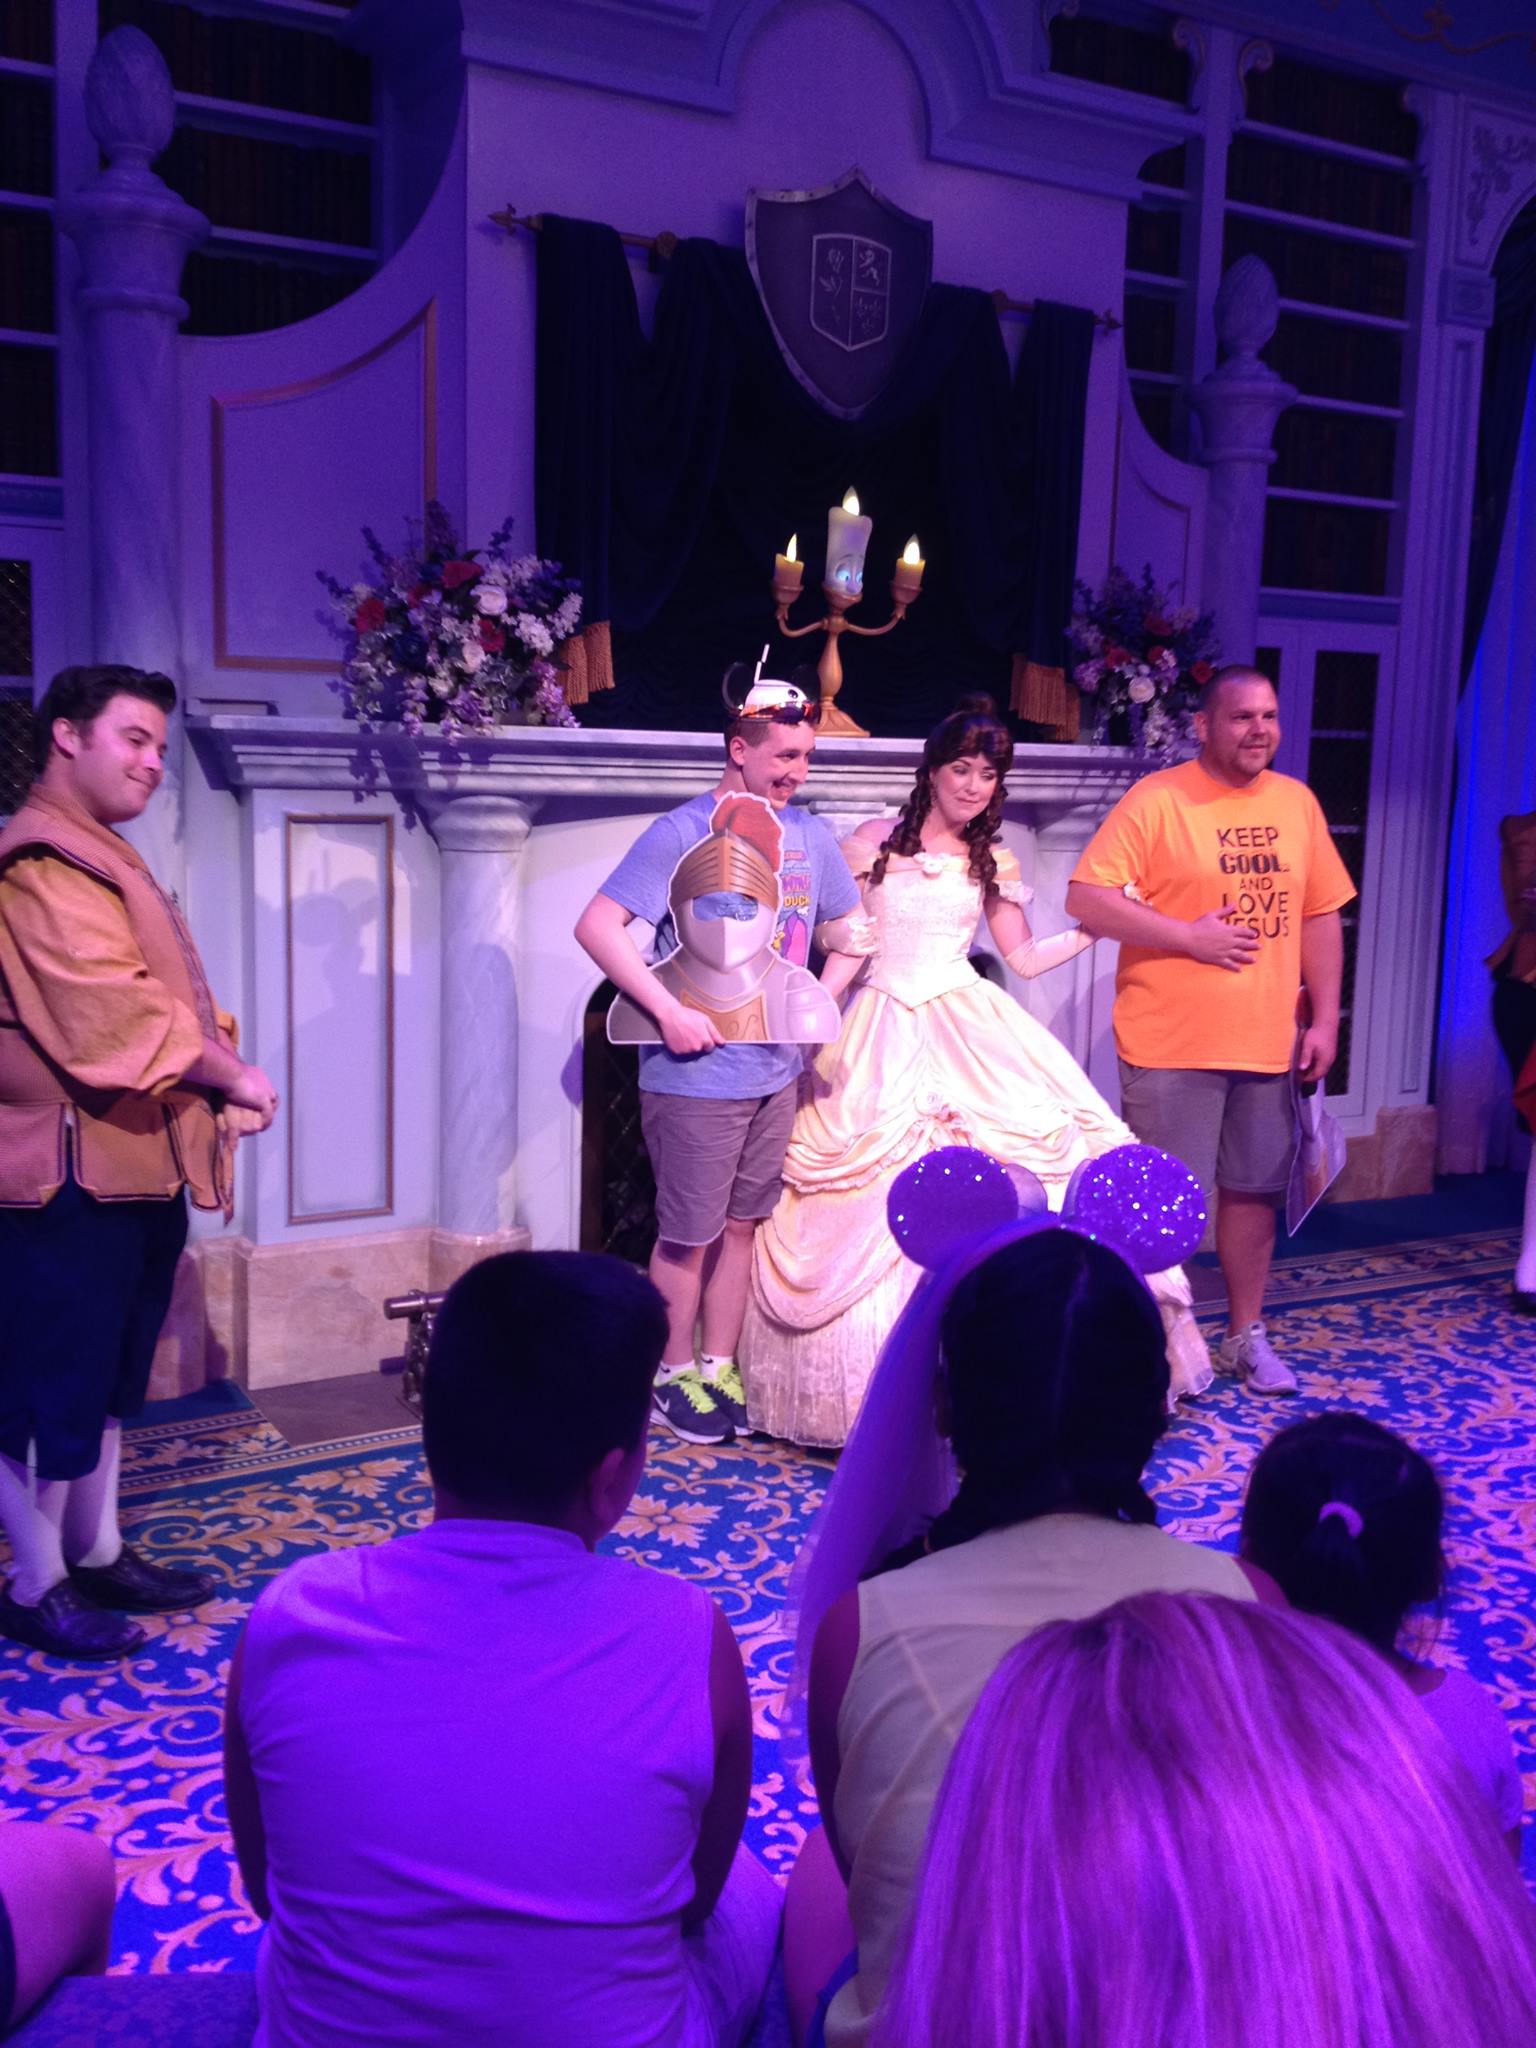 Me and some random guy with Belle